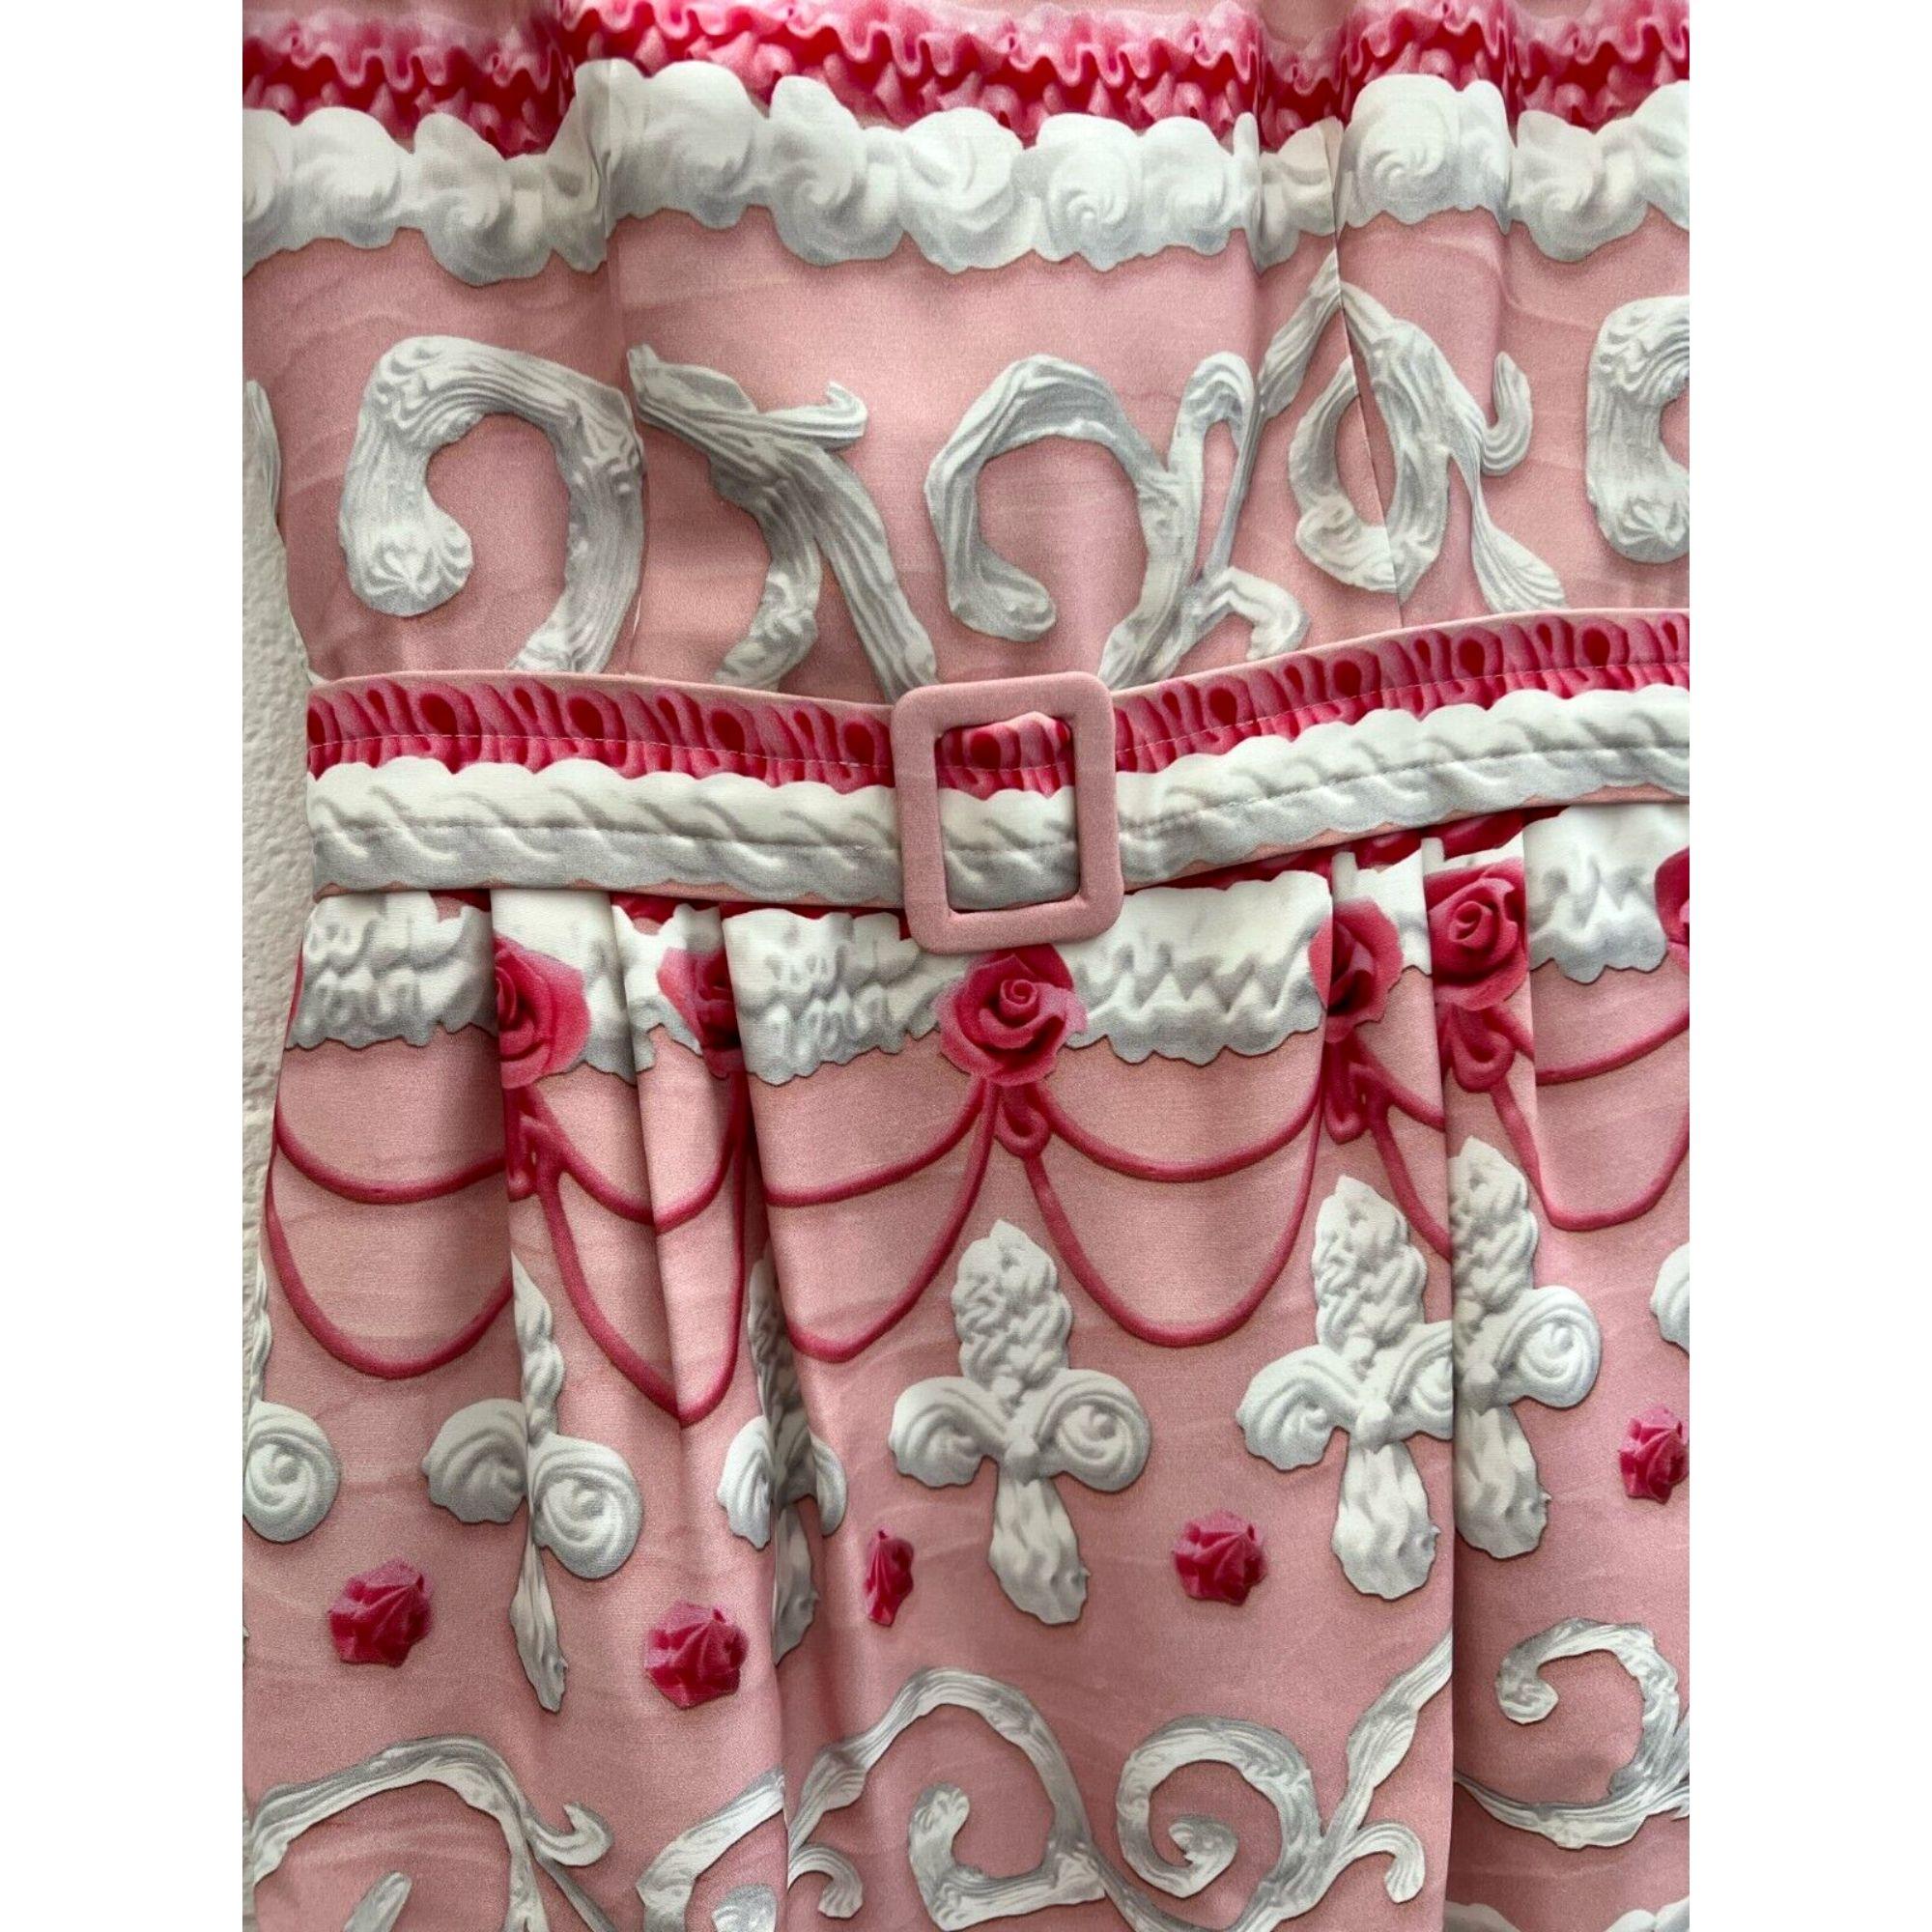 Marron AW20 Moschino Couture Marie Antoinette Pink Pastel Cake Dress by Jeremy Scott en vente